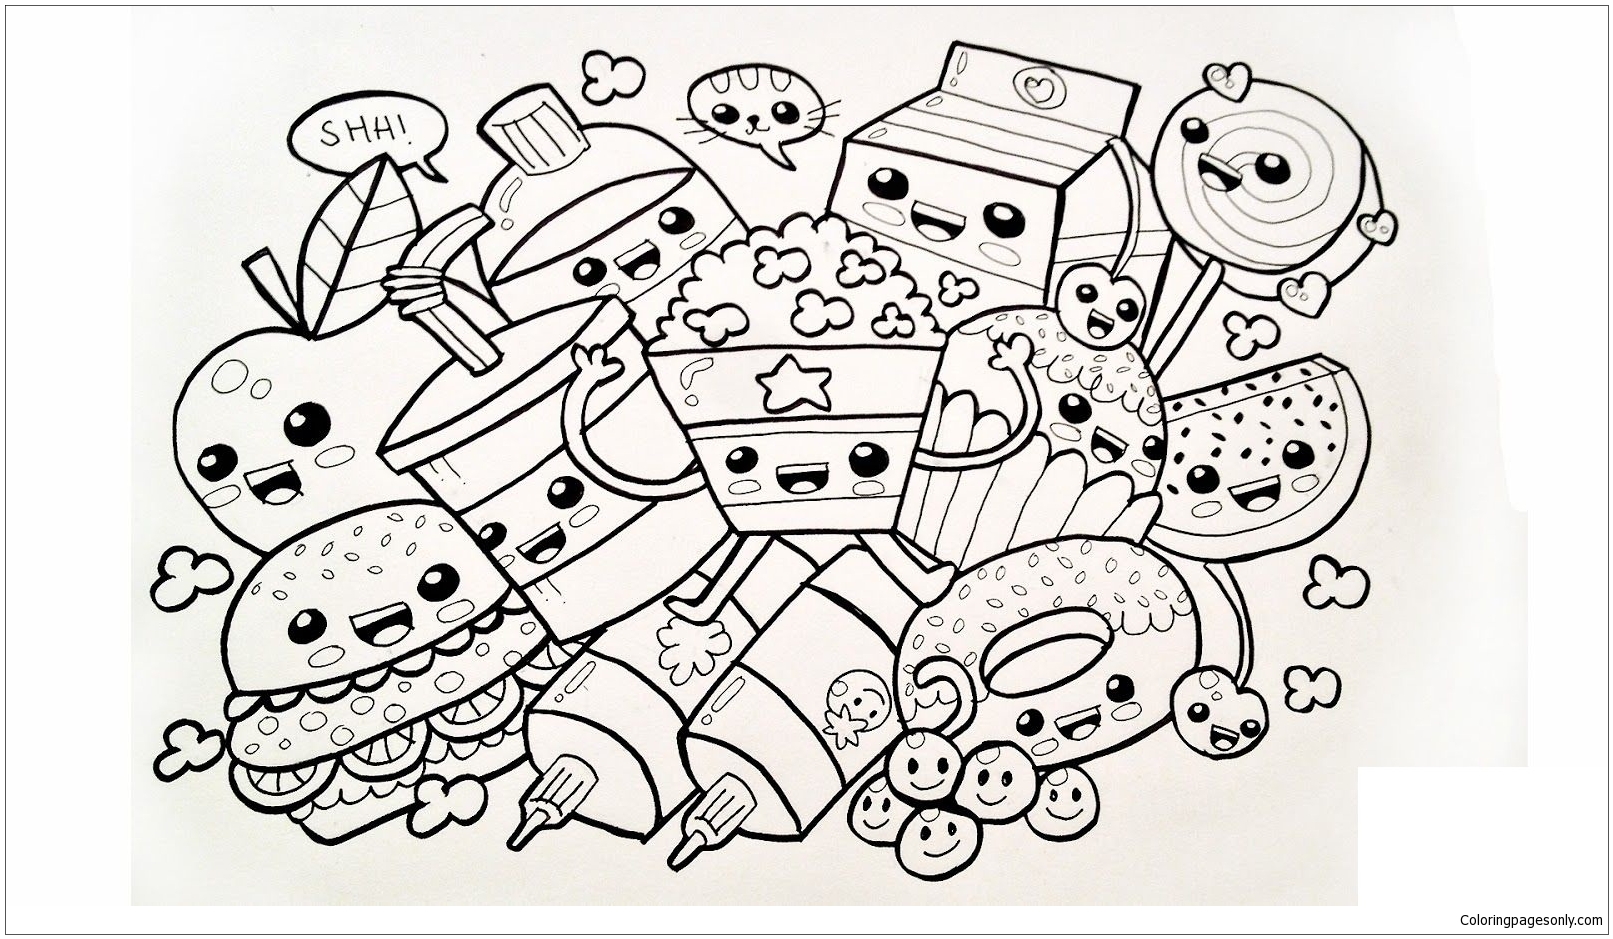 Cute Food Coloring Page - Free Coloring Pages Online